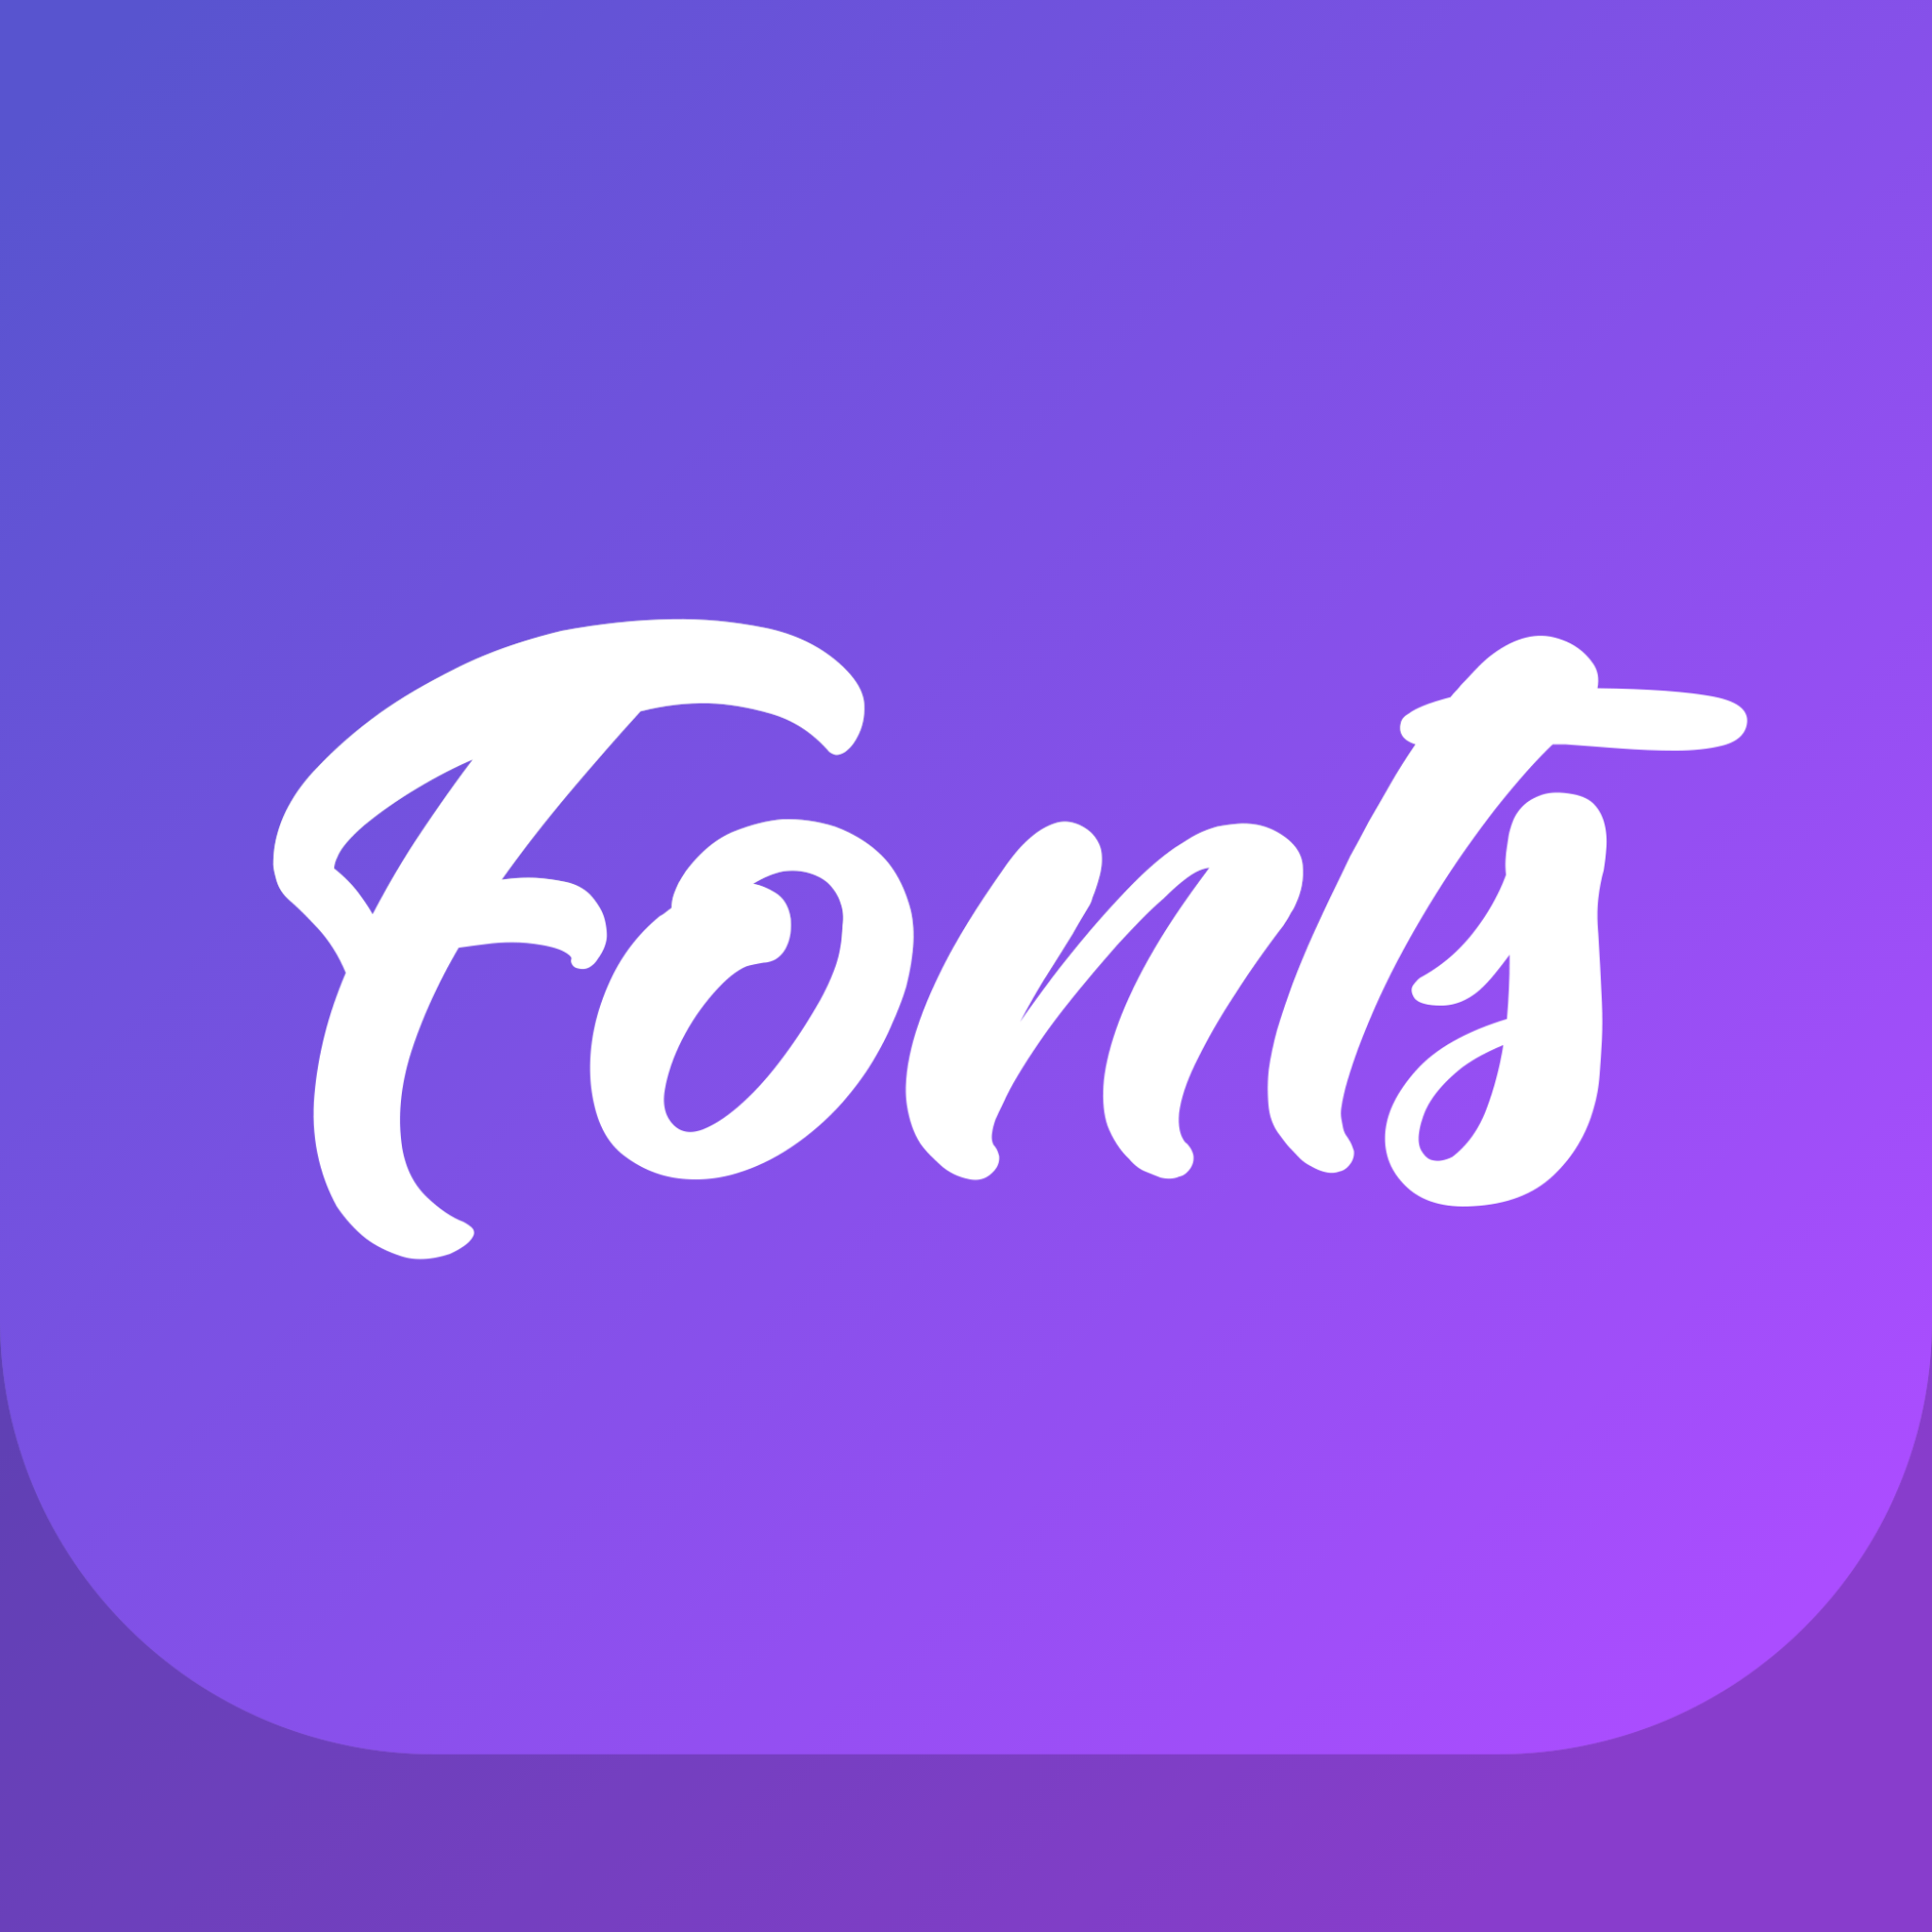 Fonts for Instagram Keyboard by MM Apps, Inc.